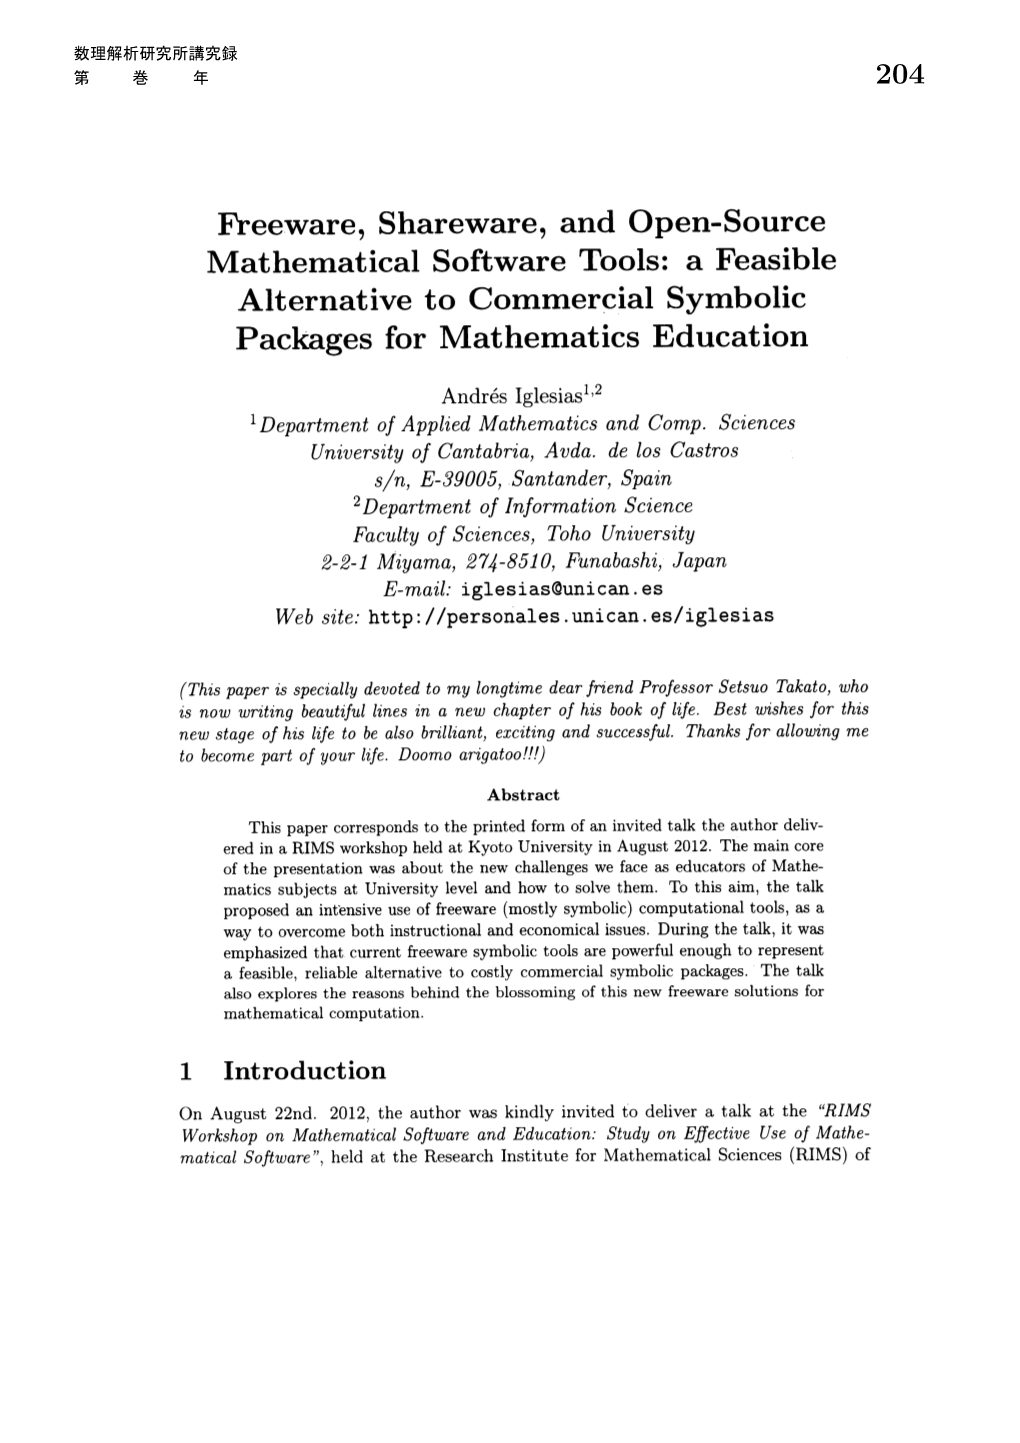 Freeware, Shareware, and Open-Source Mathematical Software Tools: a Feasible Alternative to Commercial Symbolic Packages for Mathematics Education